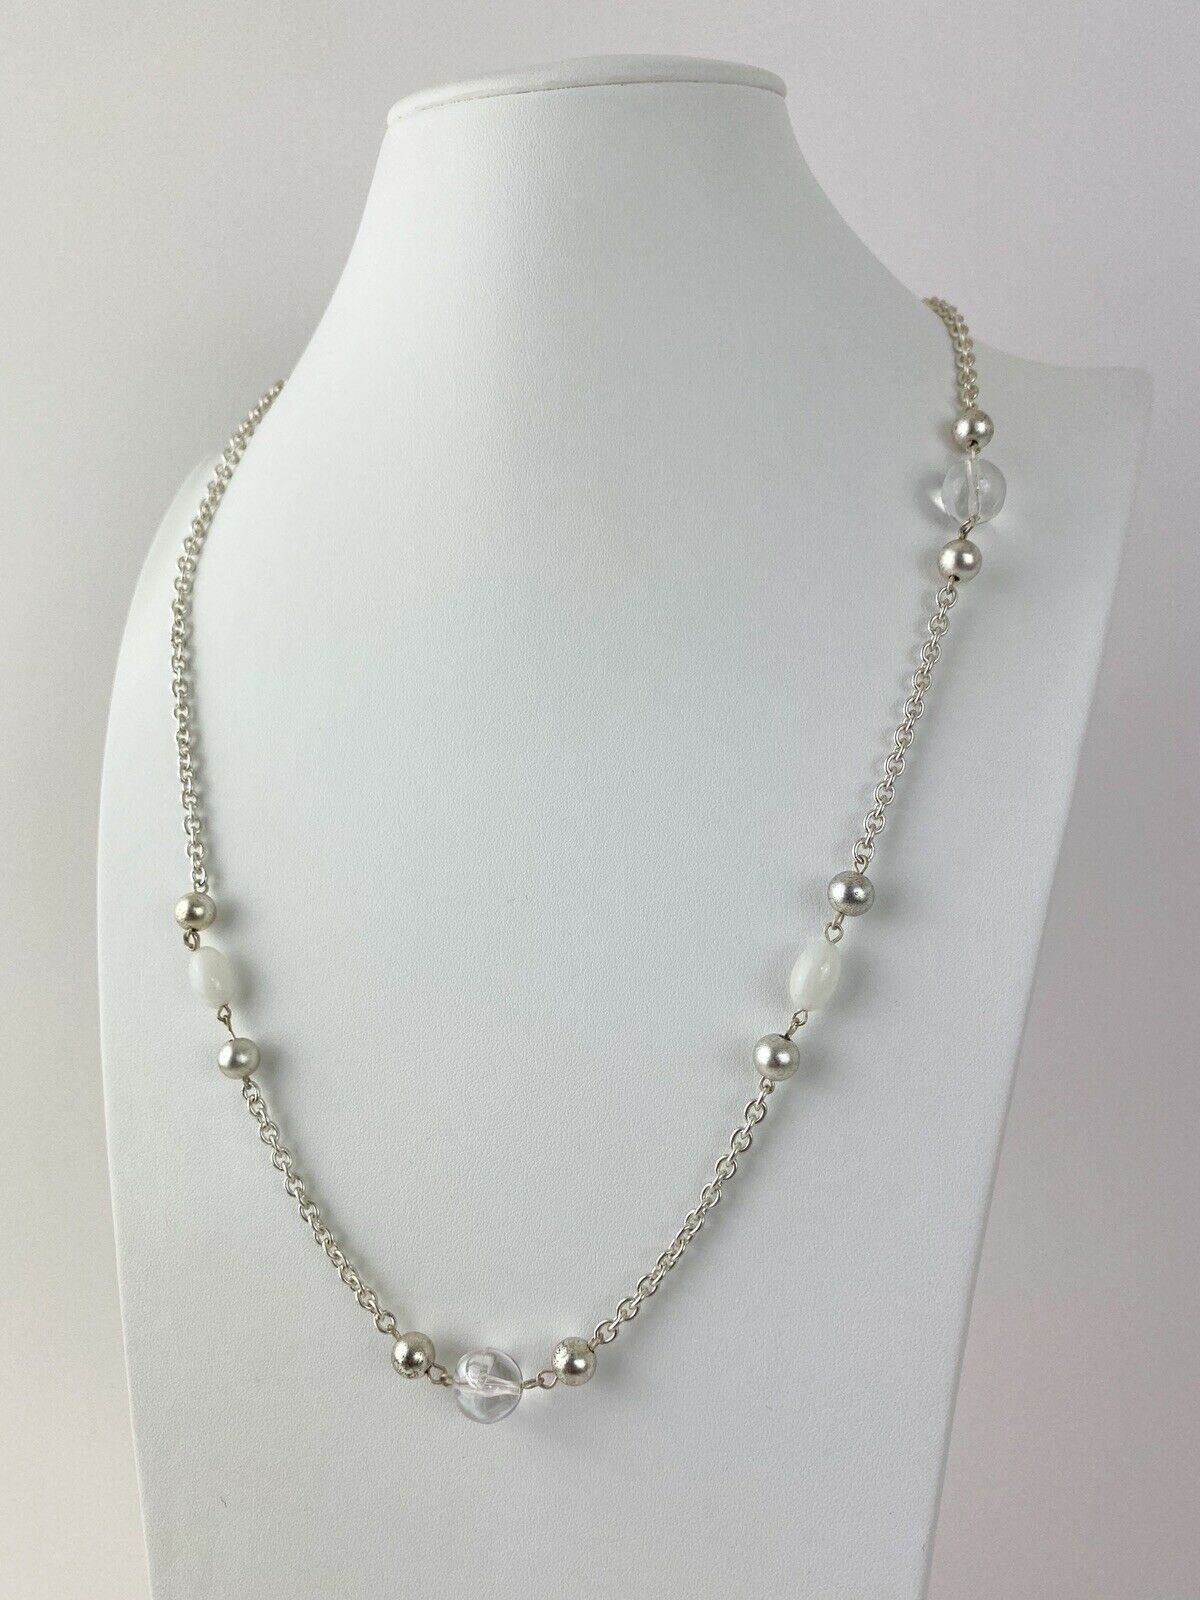 Givenchy Paris New York Vintage Silver Tone Long Necklace Beads